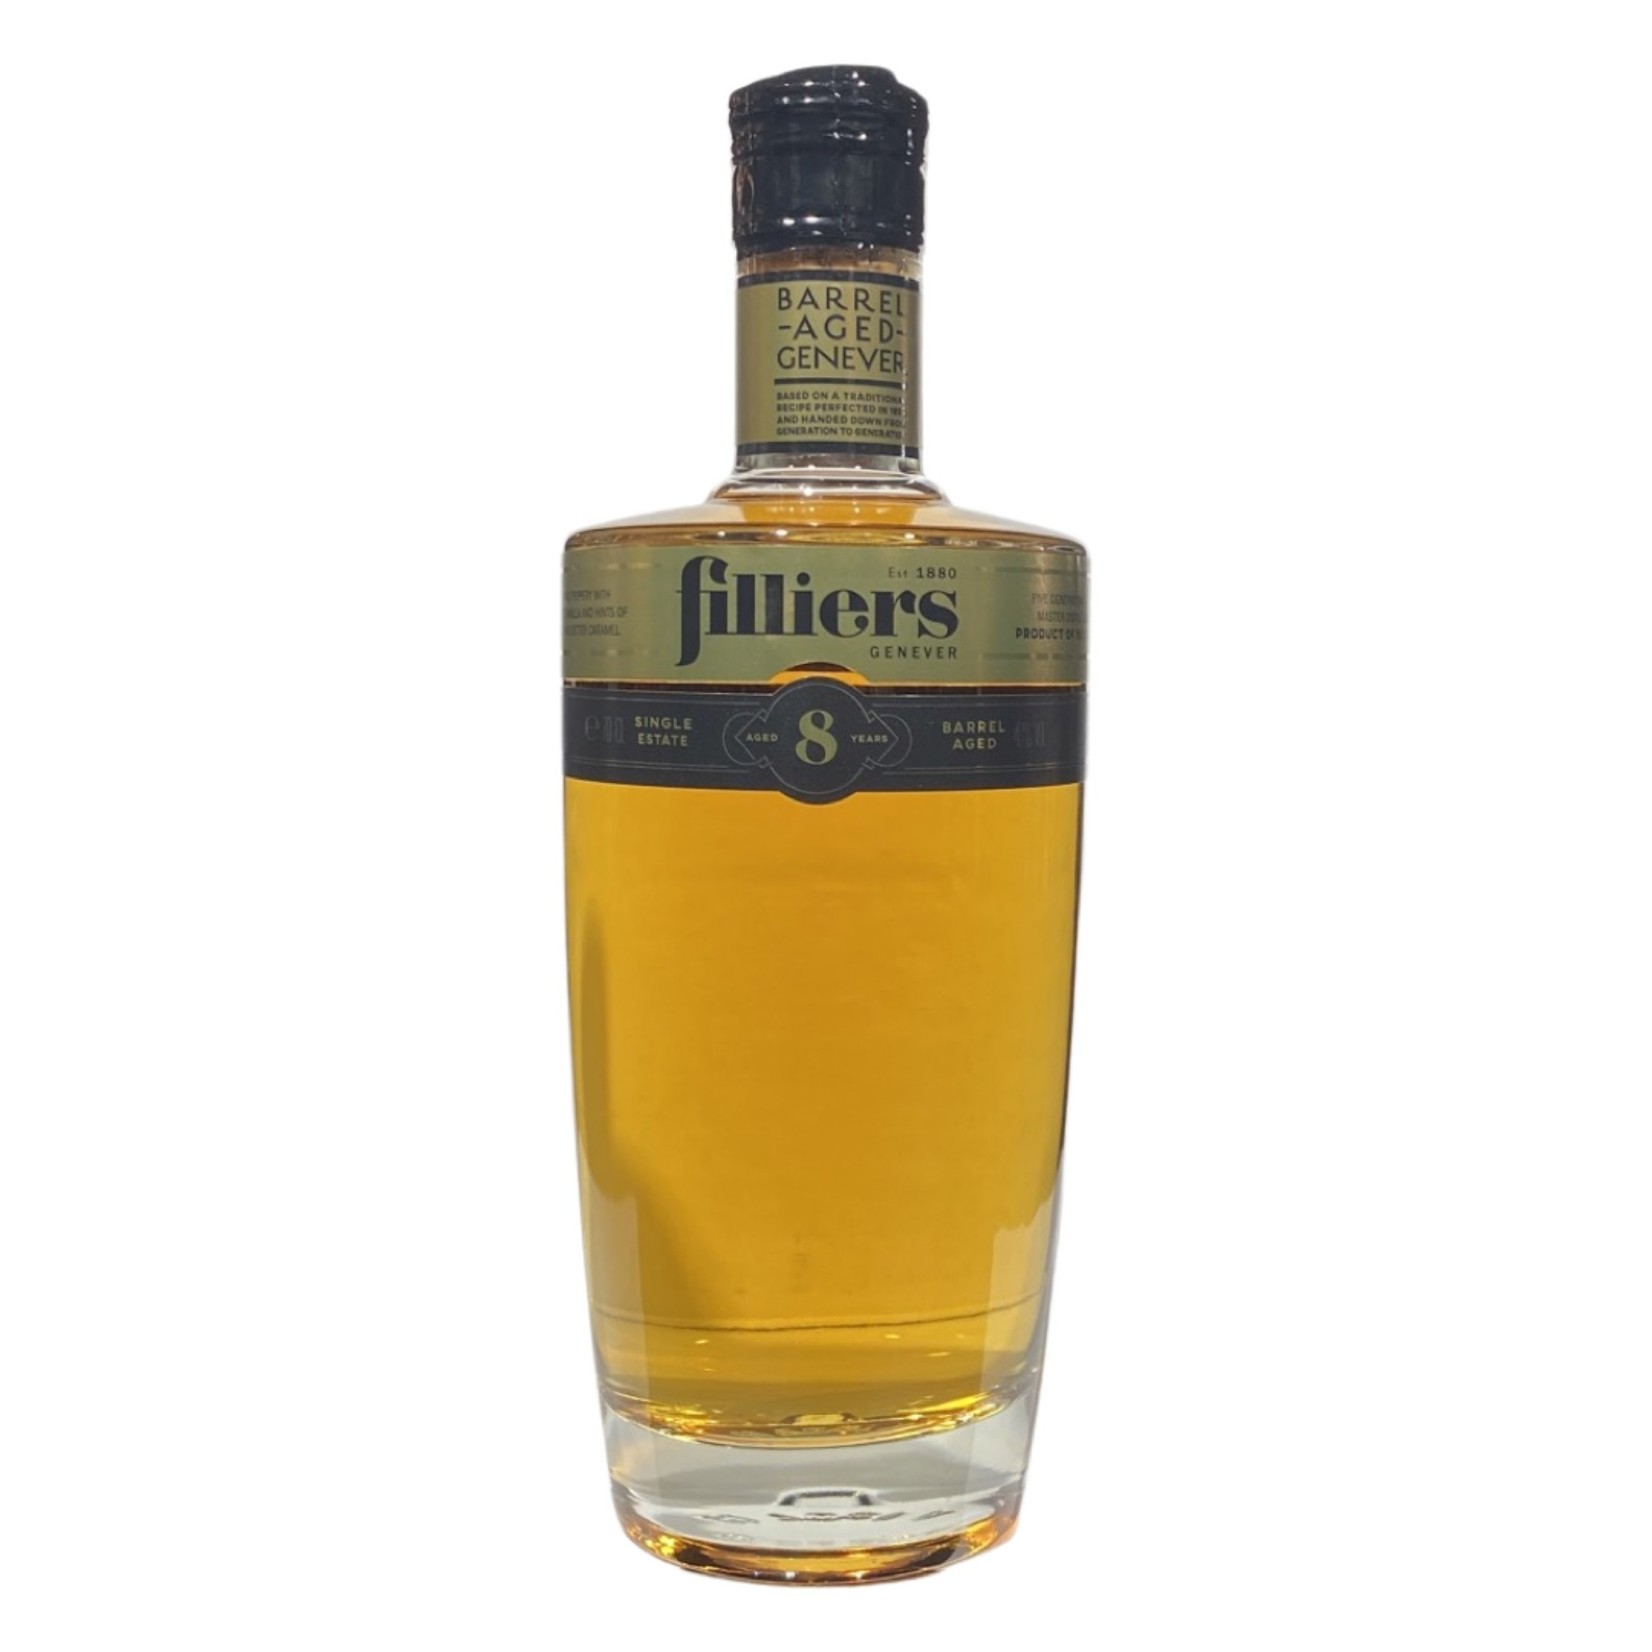 Filliers Genever 8 years 0,7 ltr